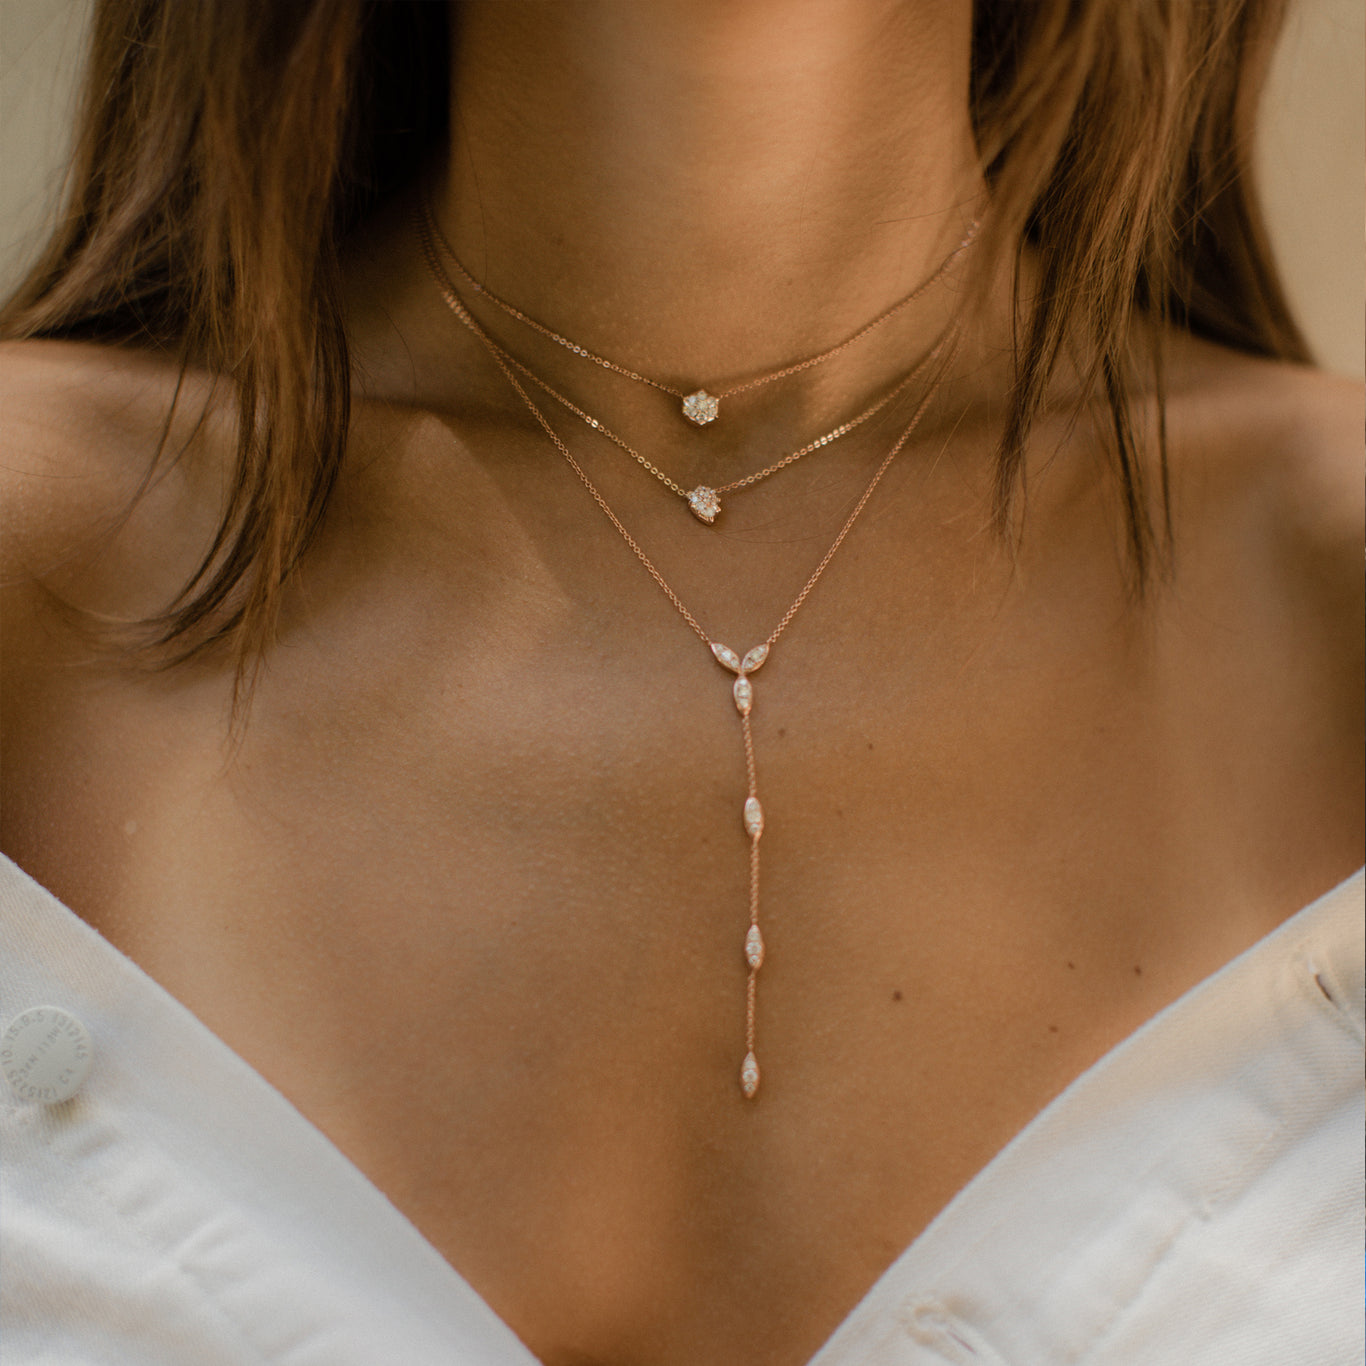 Cascade Lariat shown in Rose Gold